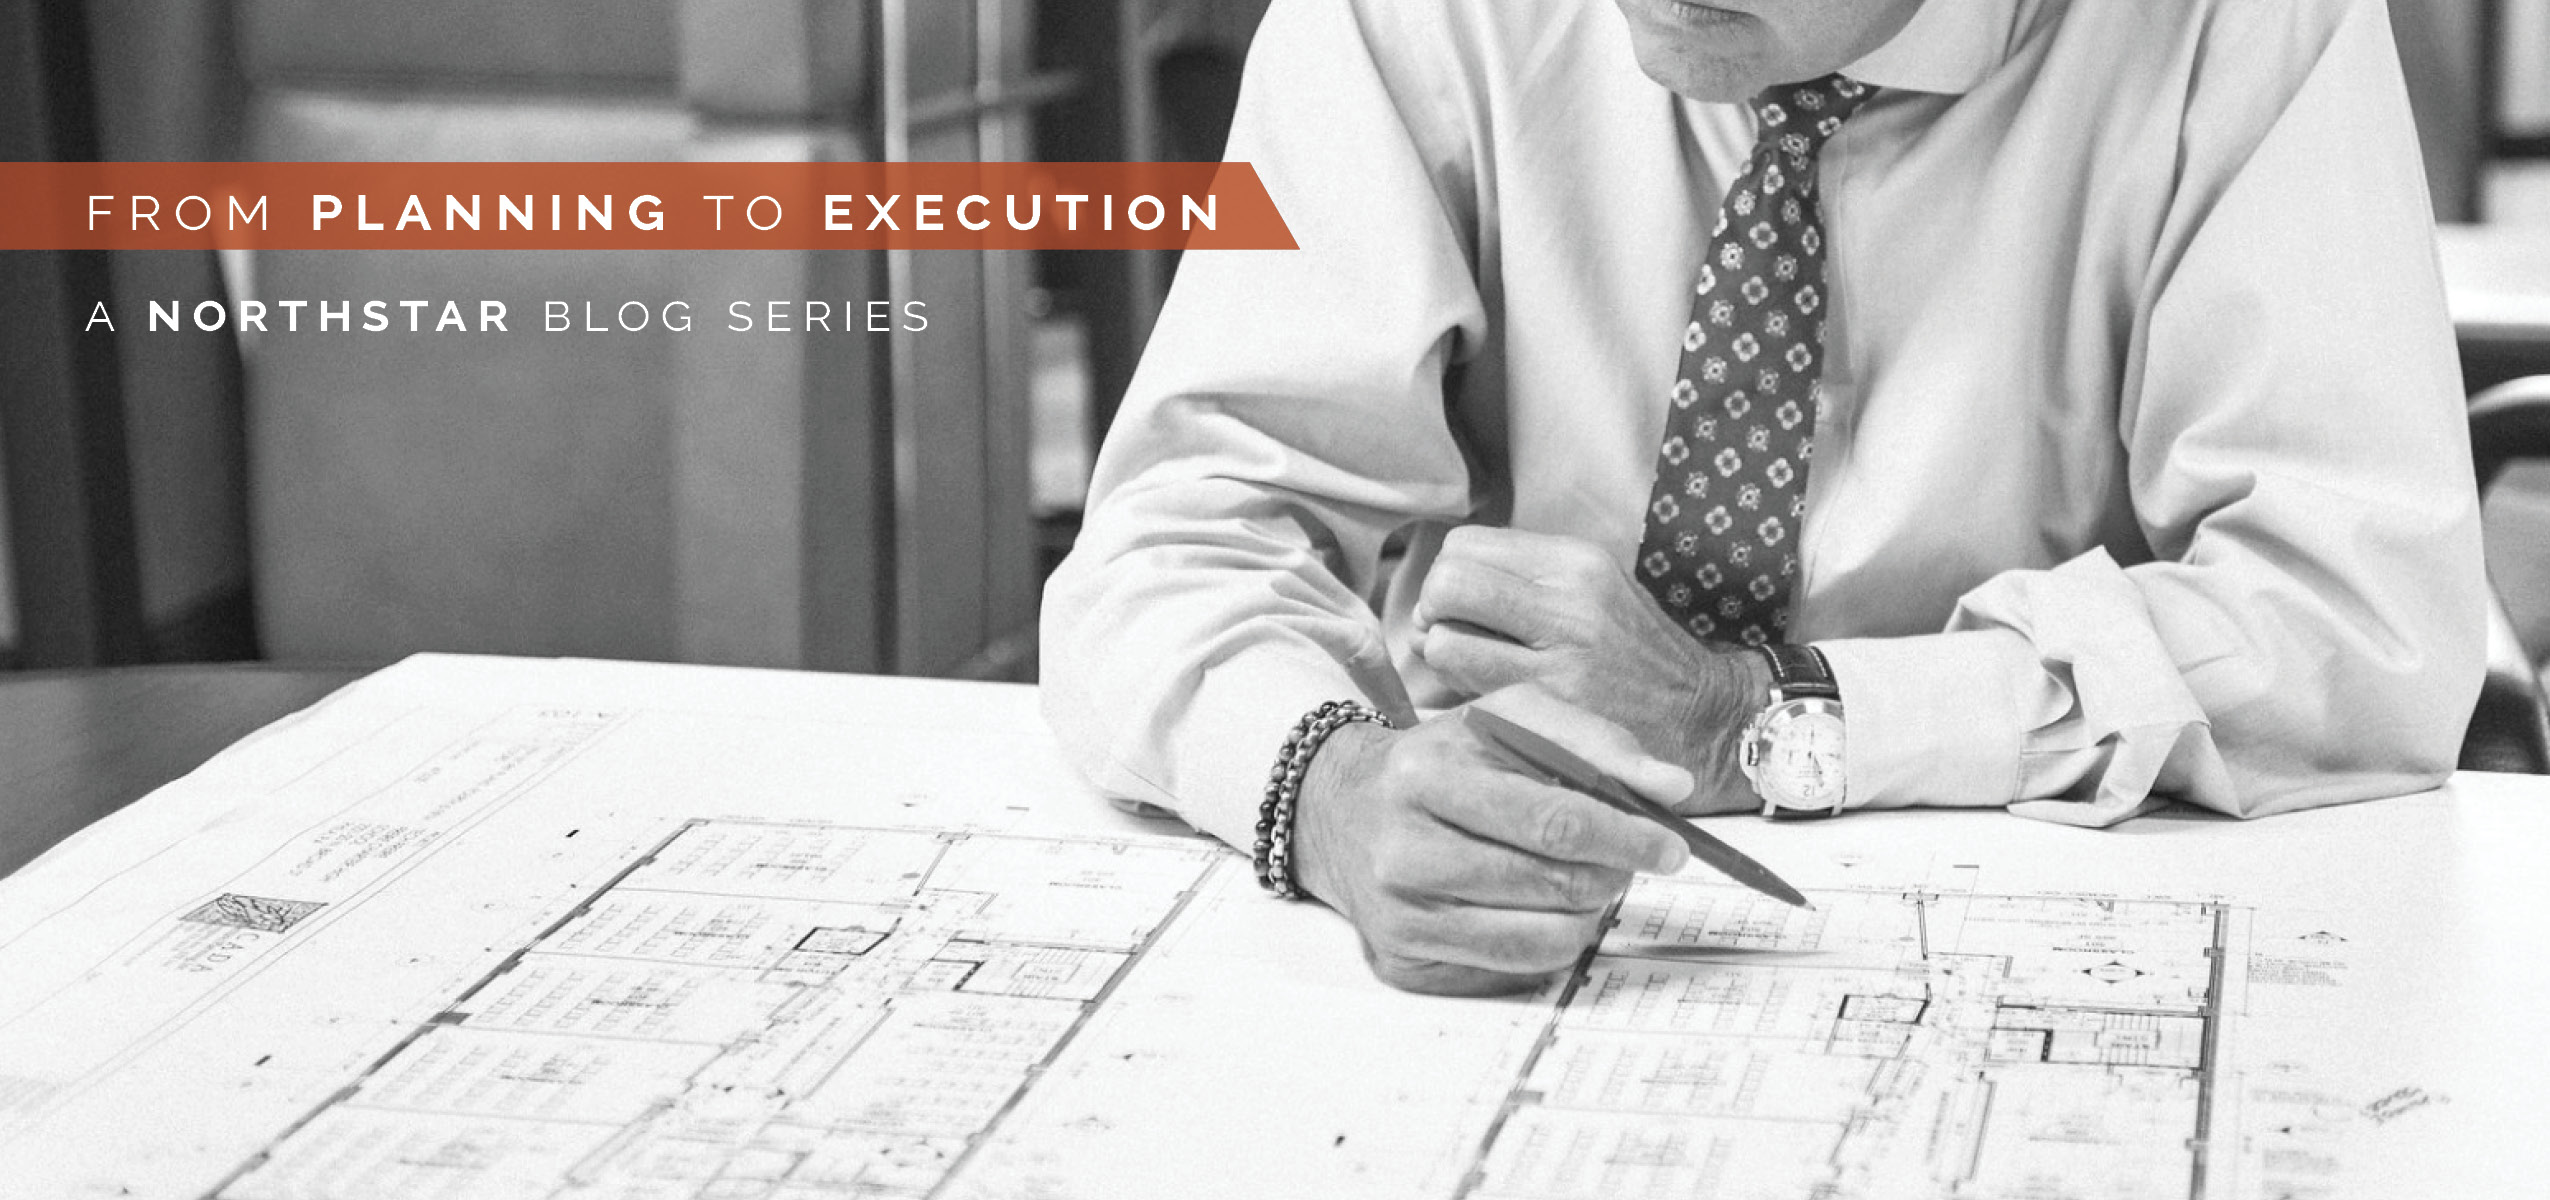 From Planning To Execution: A NorthStar Blog Series